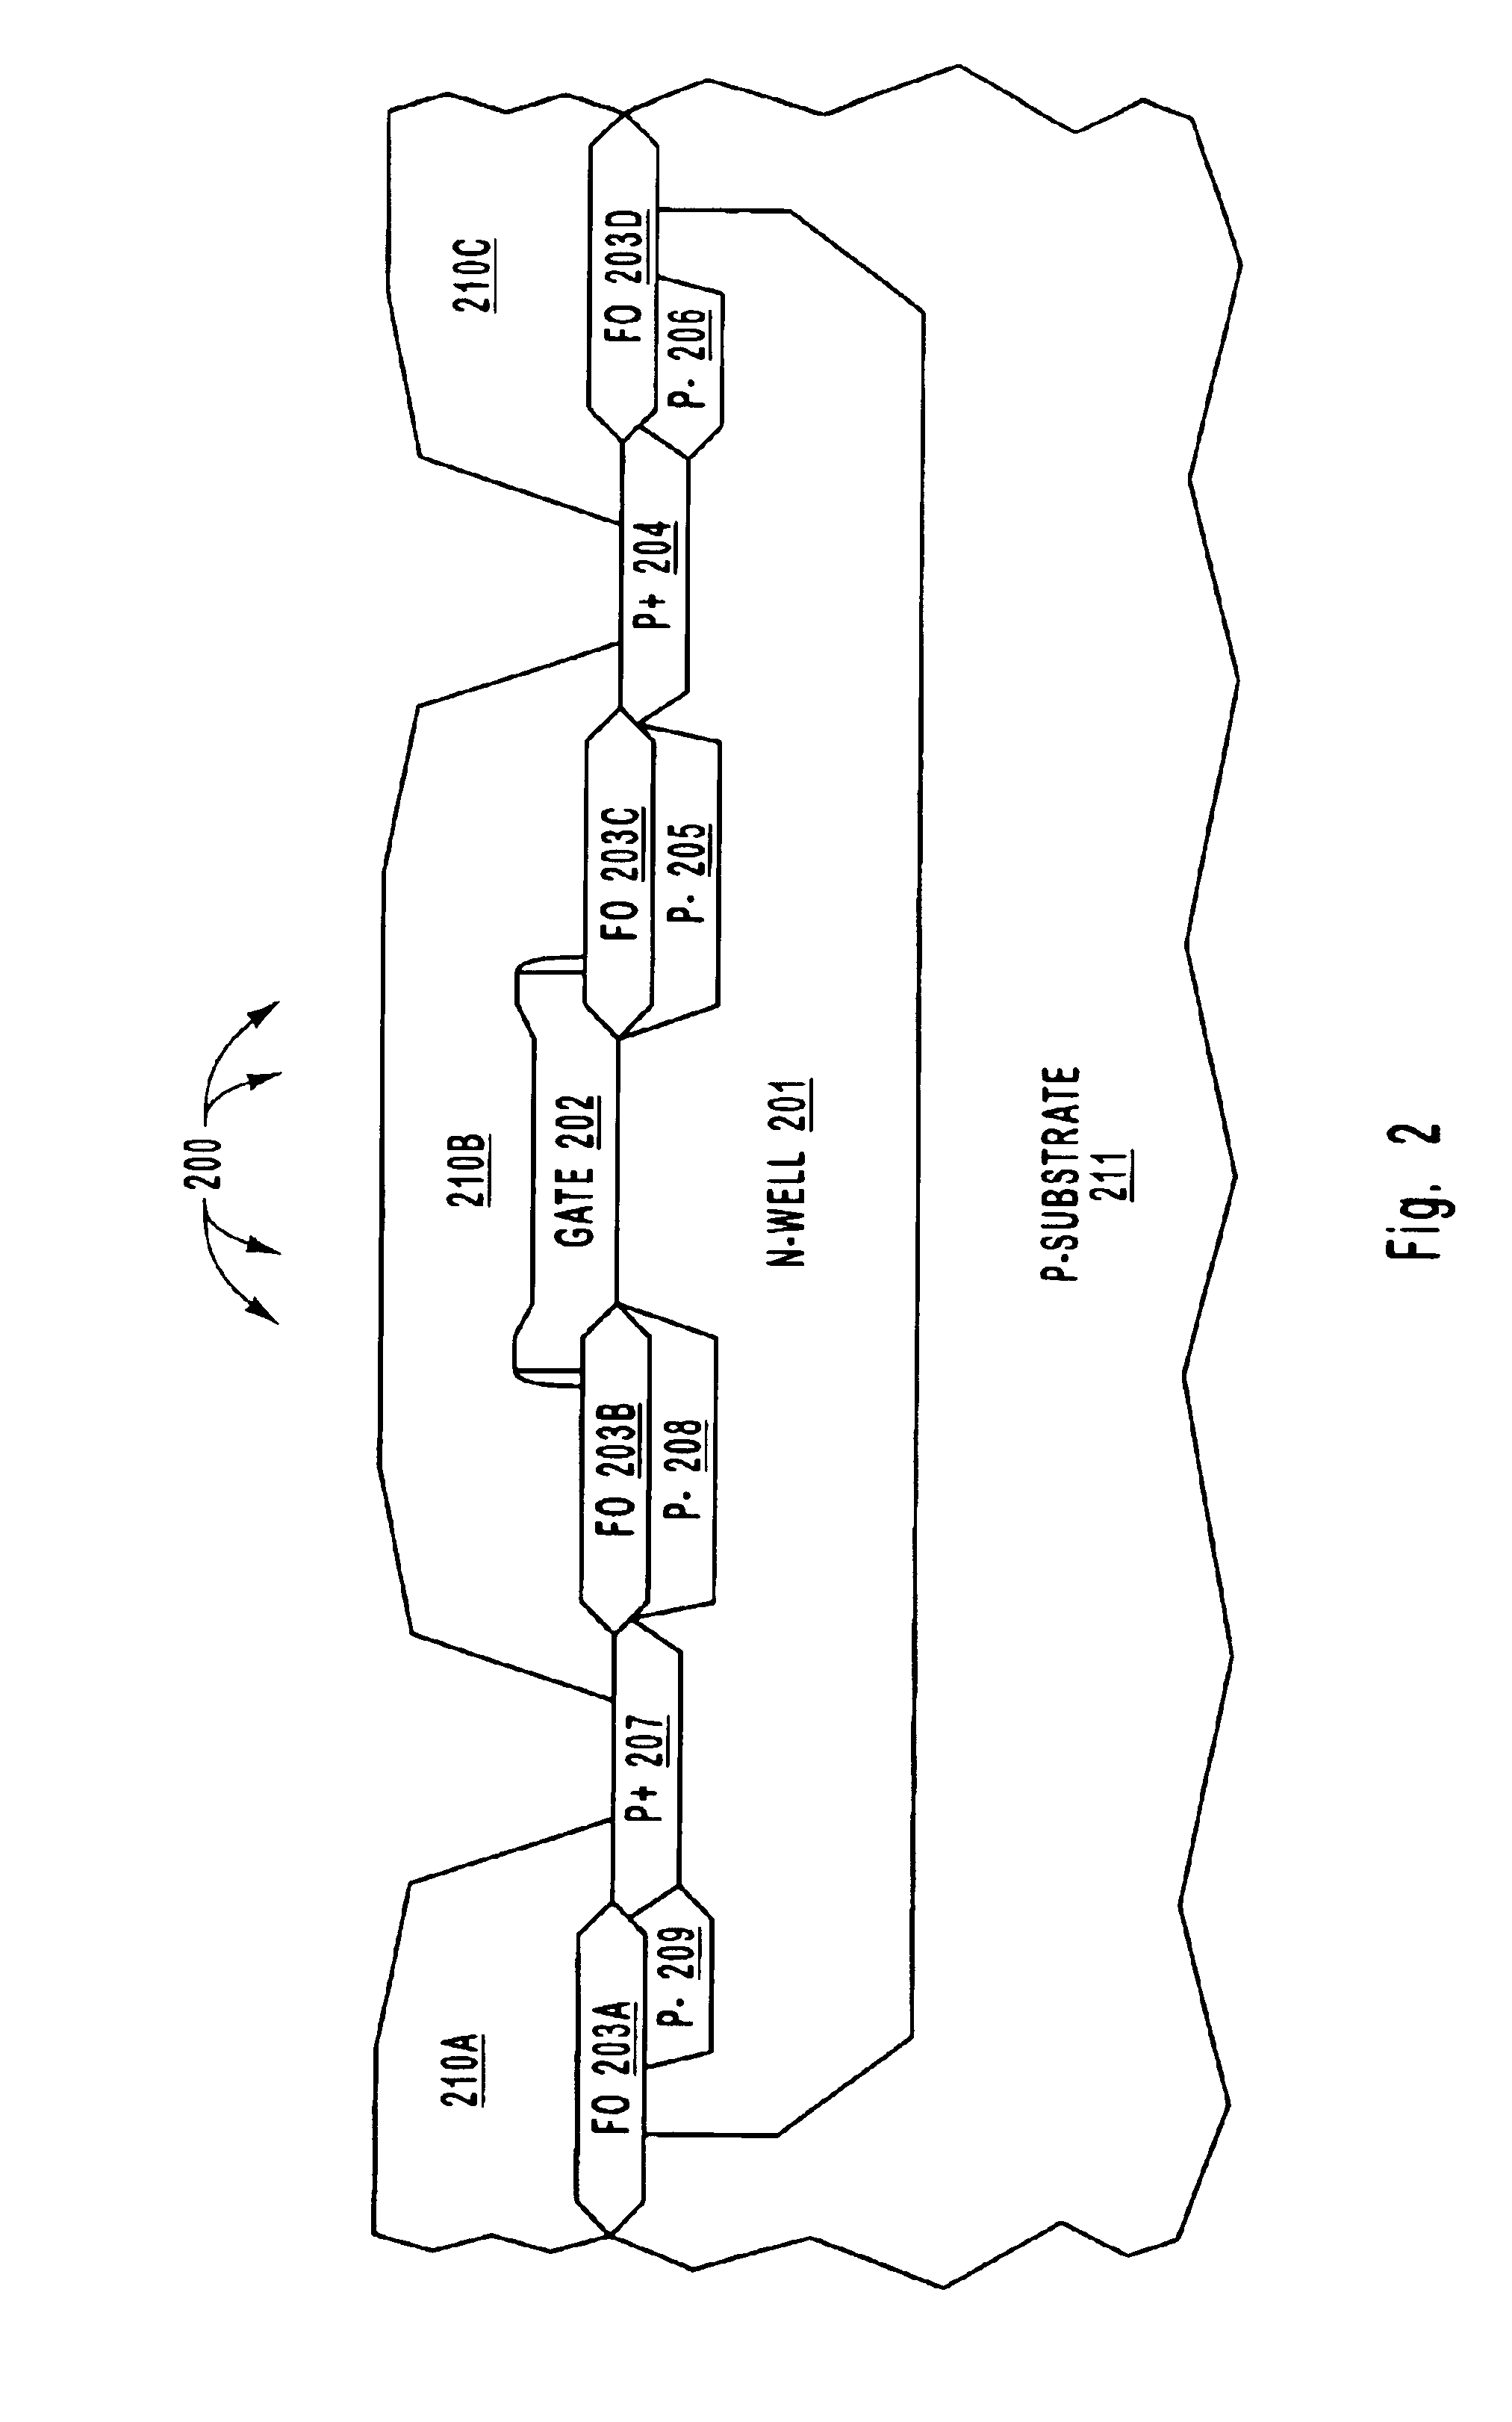 Double-sided extended drain field effect transistor, and integrated overvoltage and reverse voltage protection circuit that uses the same